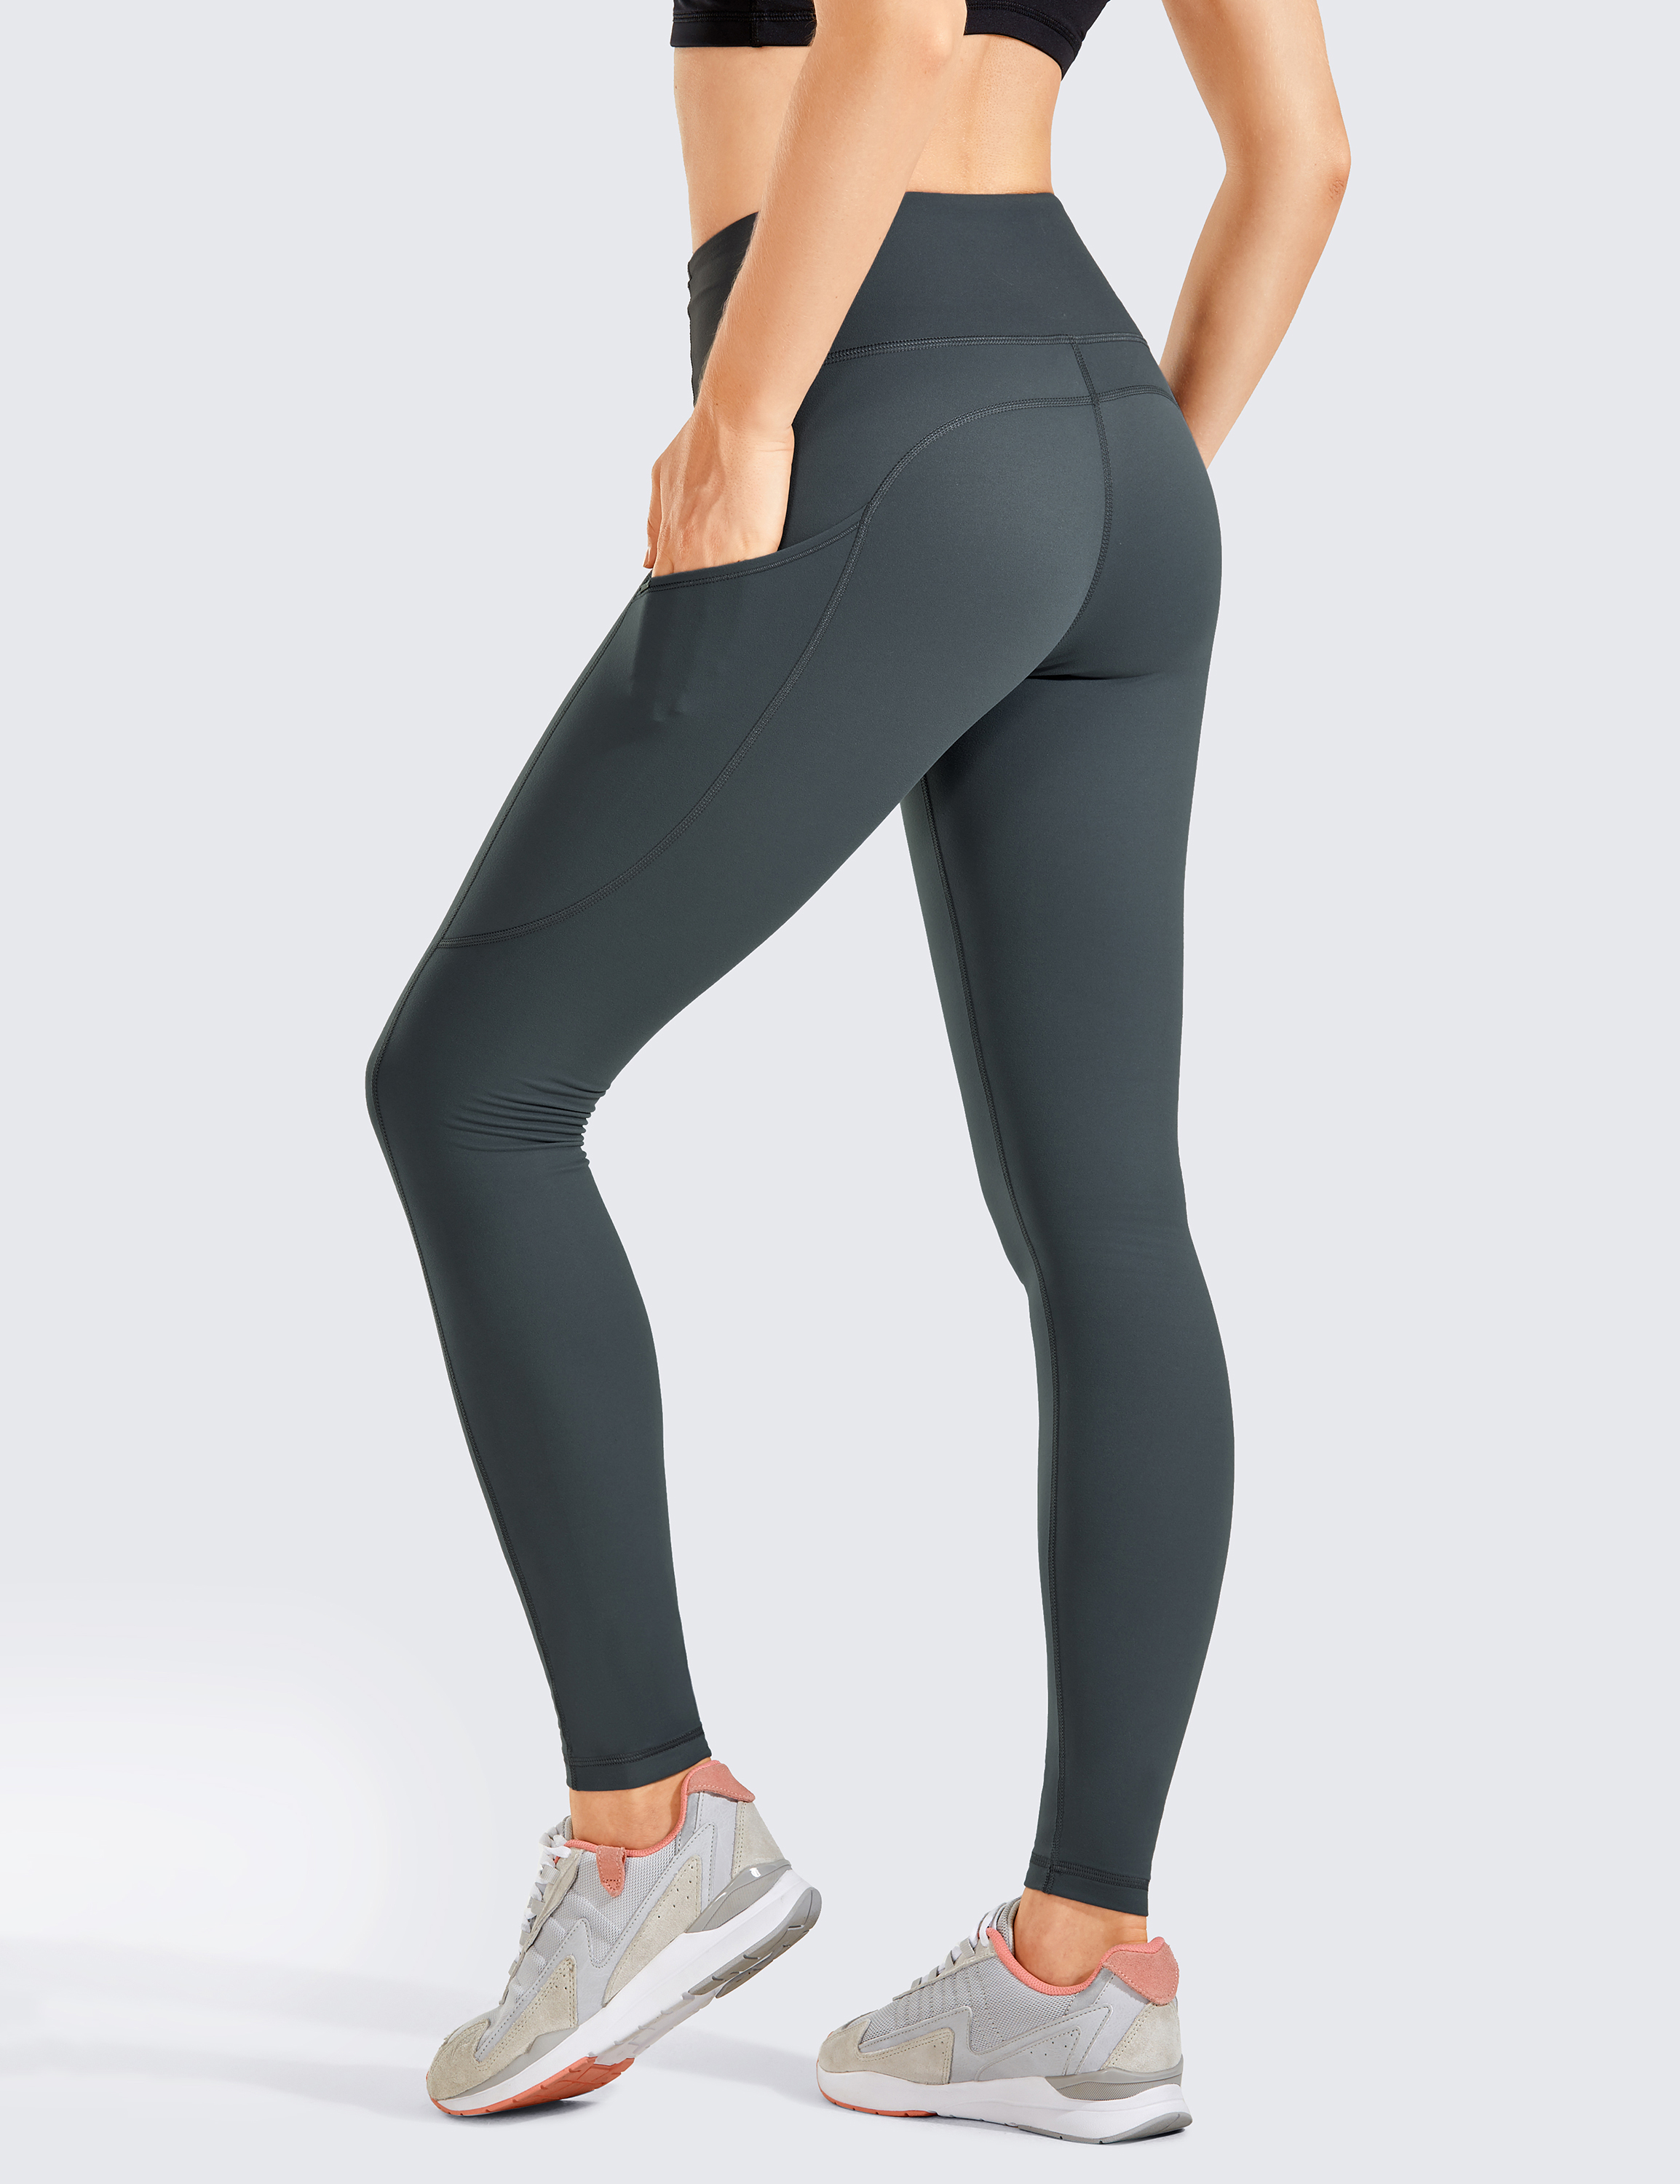 Who Makes Crz Yoga Pants For Women  International Society of Precision  Agriculture